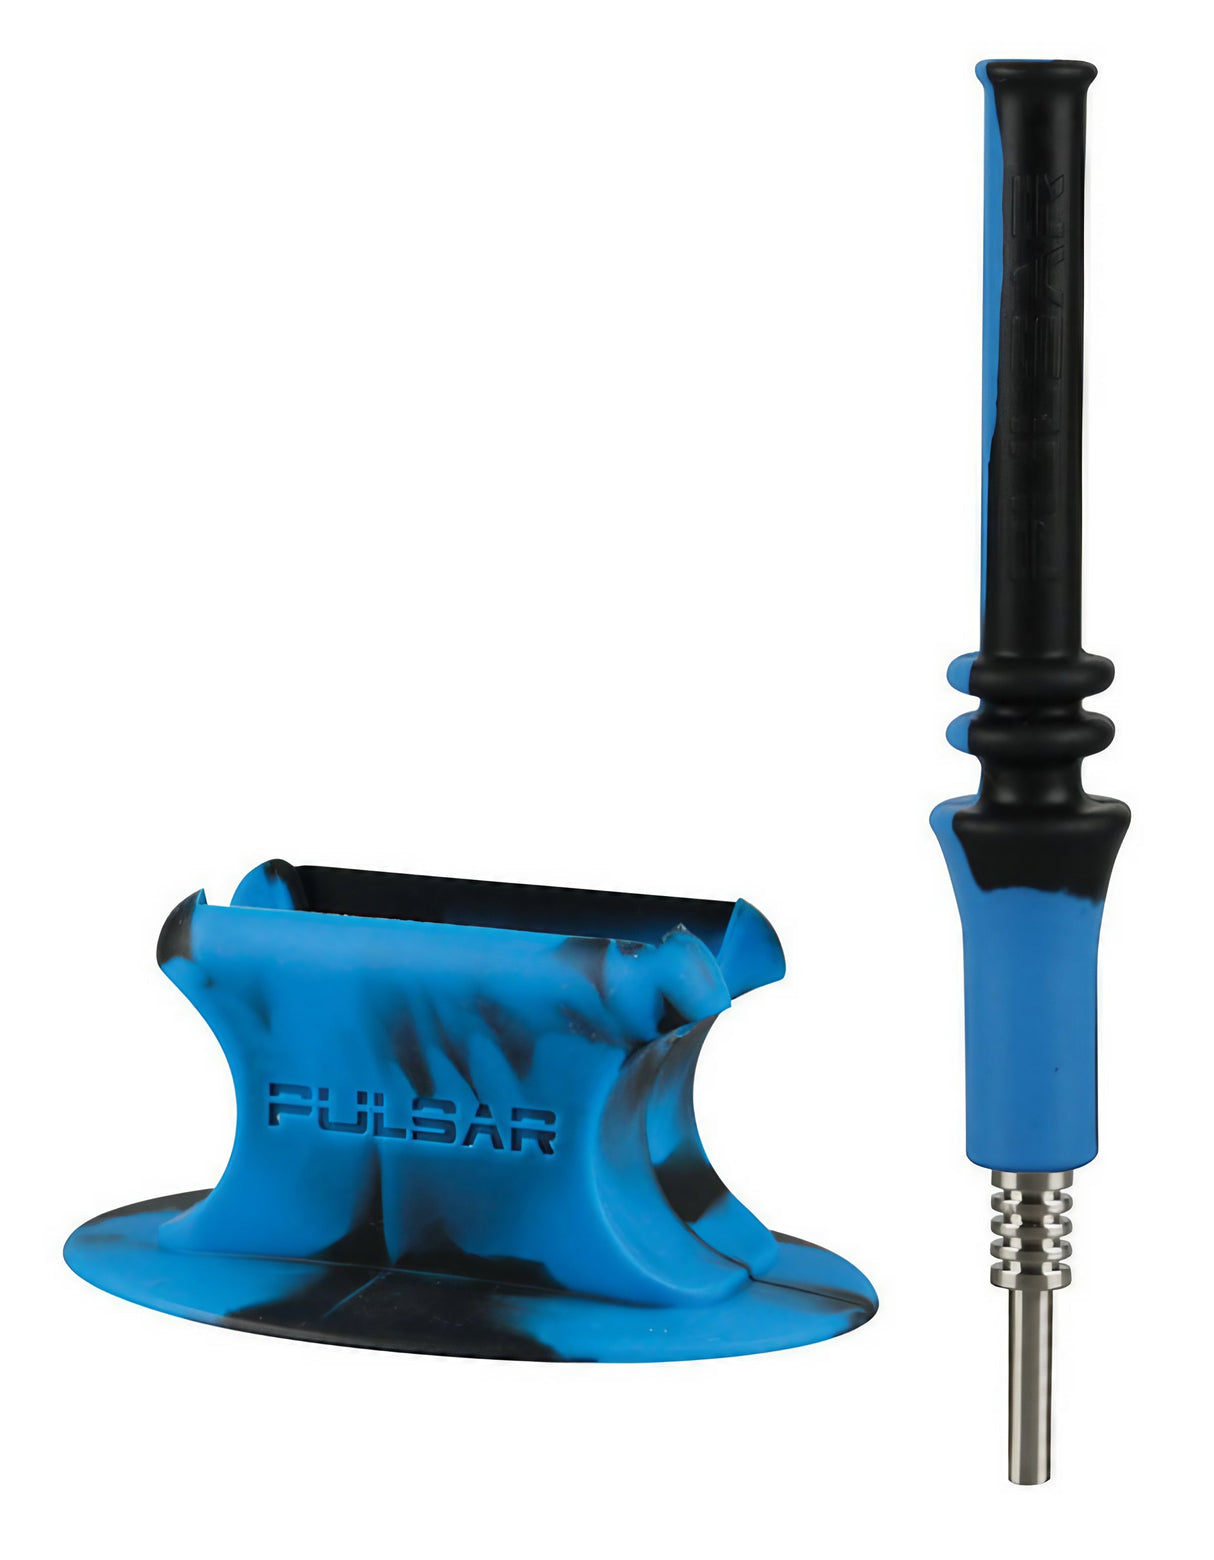 Pulsar RIP Vapor Straw with Stand in Blue/Black Swirl, Silicone and Titanium for Concentrates